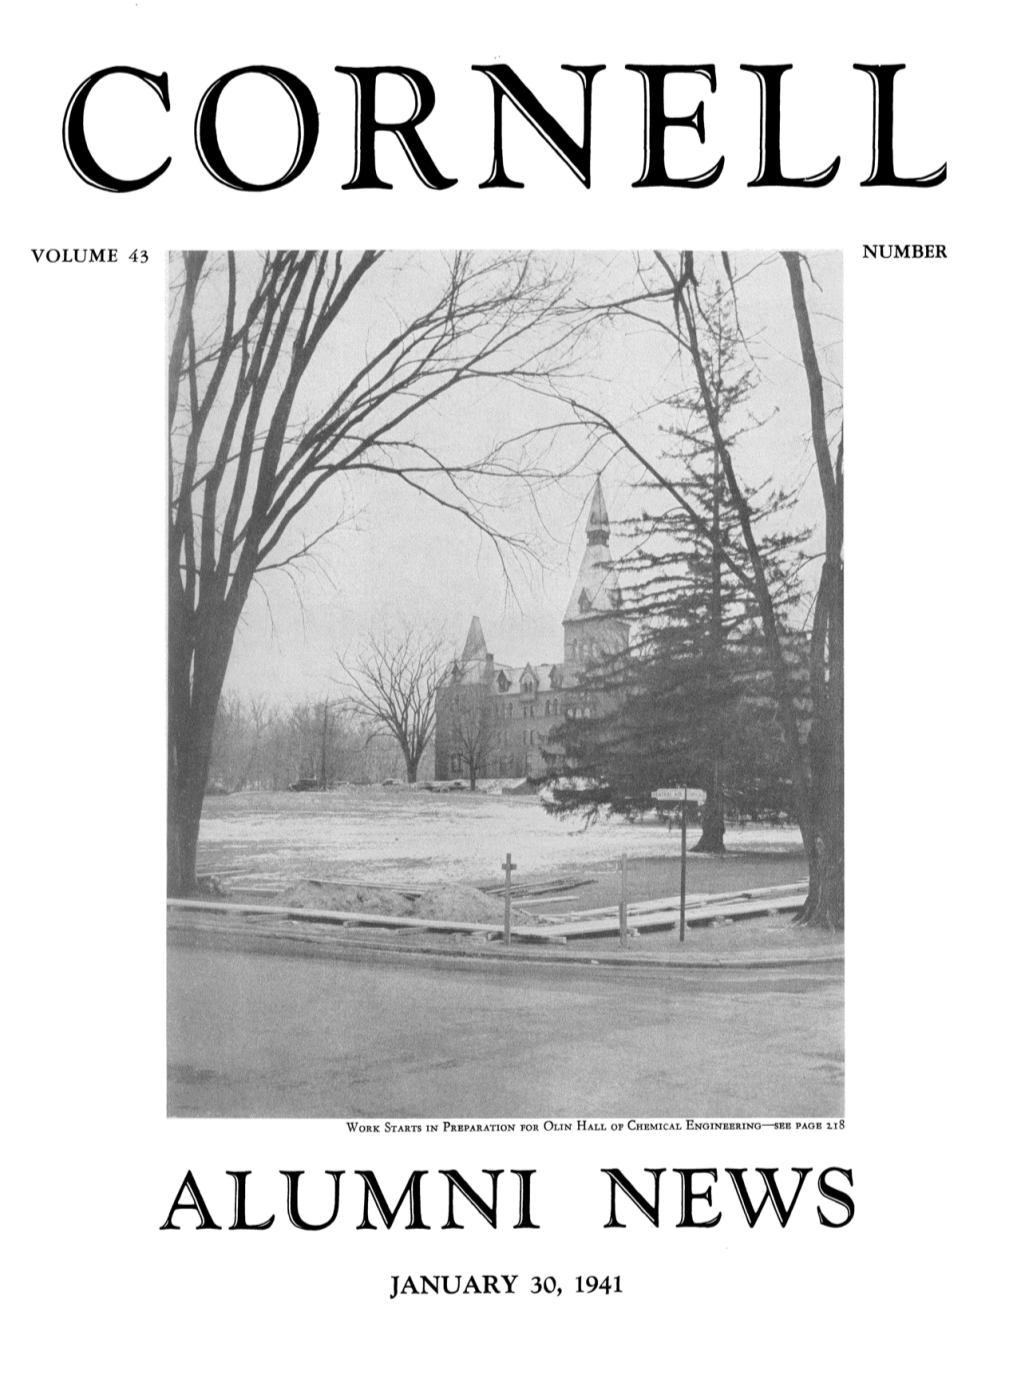 ALUMNI NEW: JANUARY 30, 1941 It's Easy to Visit Ithaca Overnight From